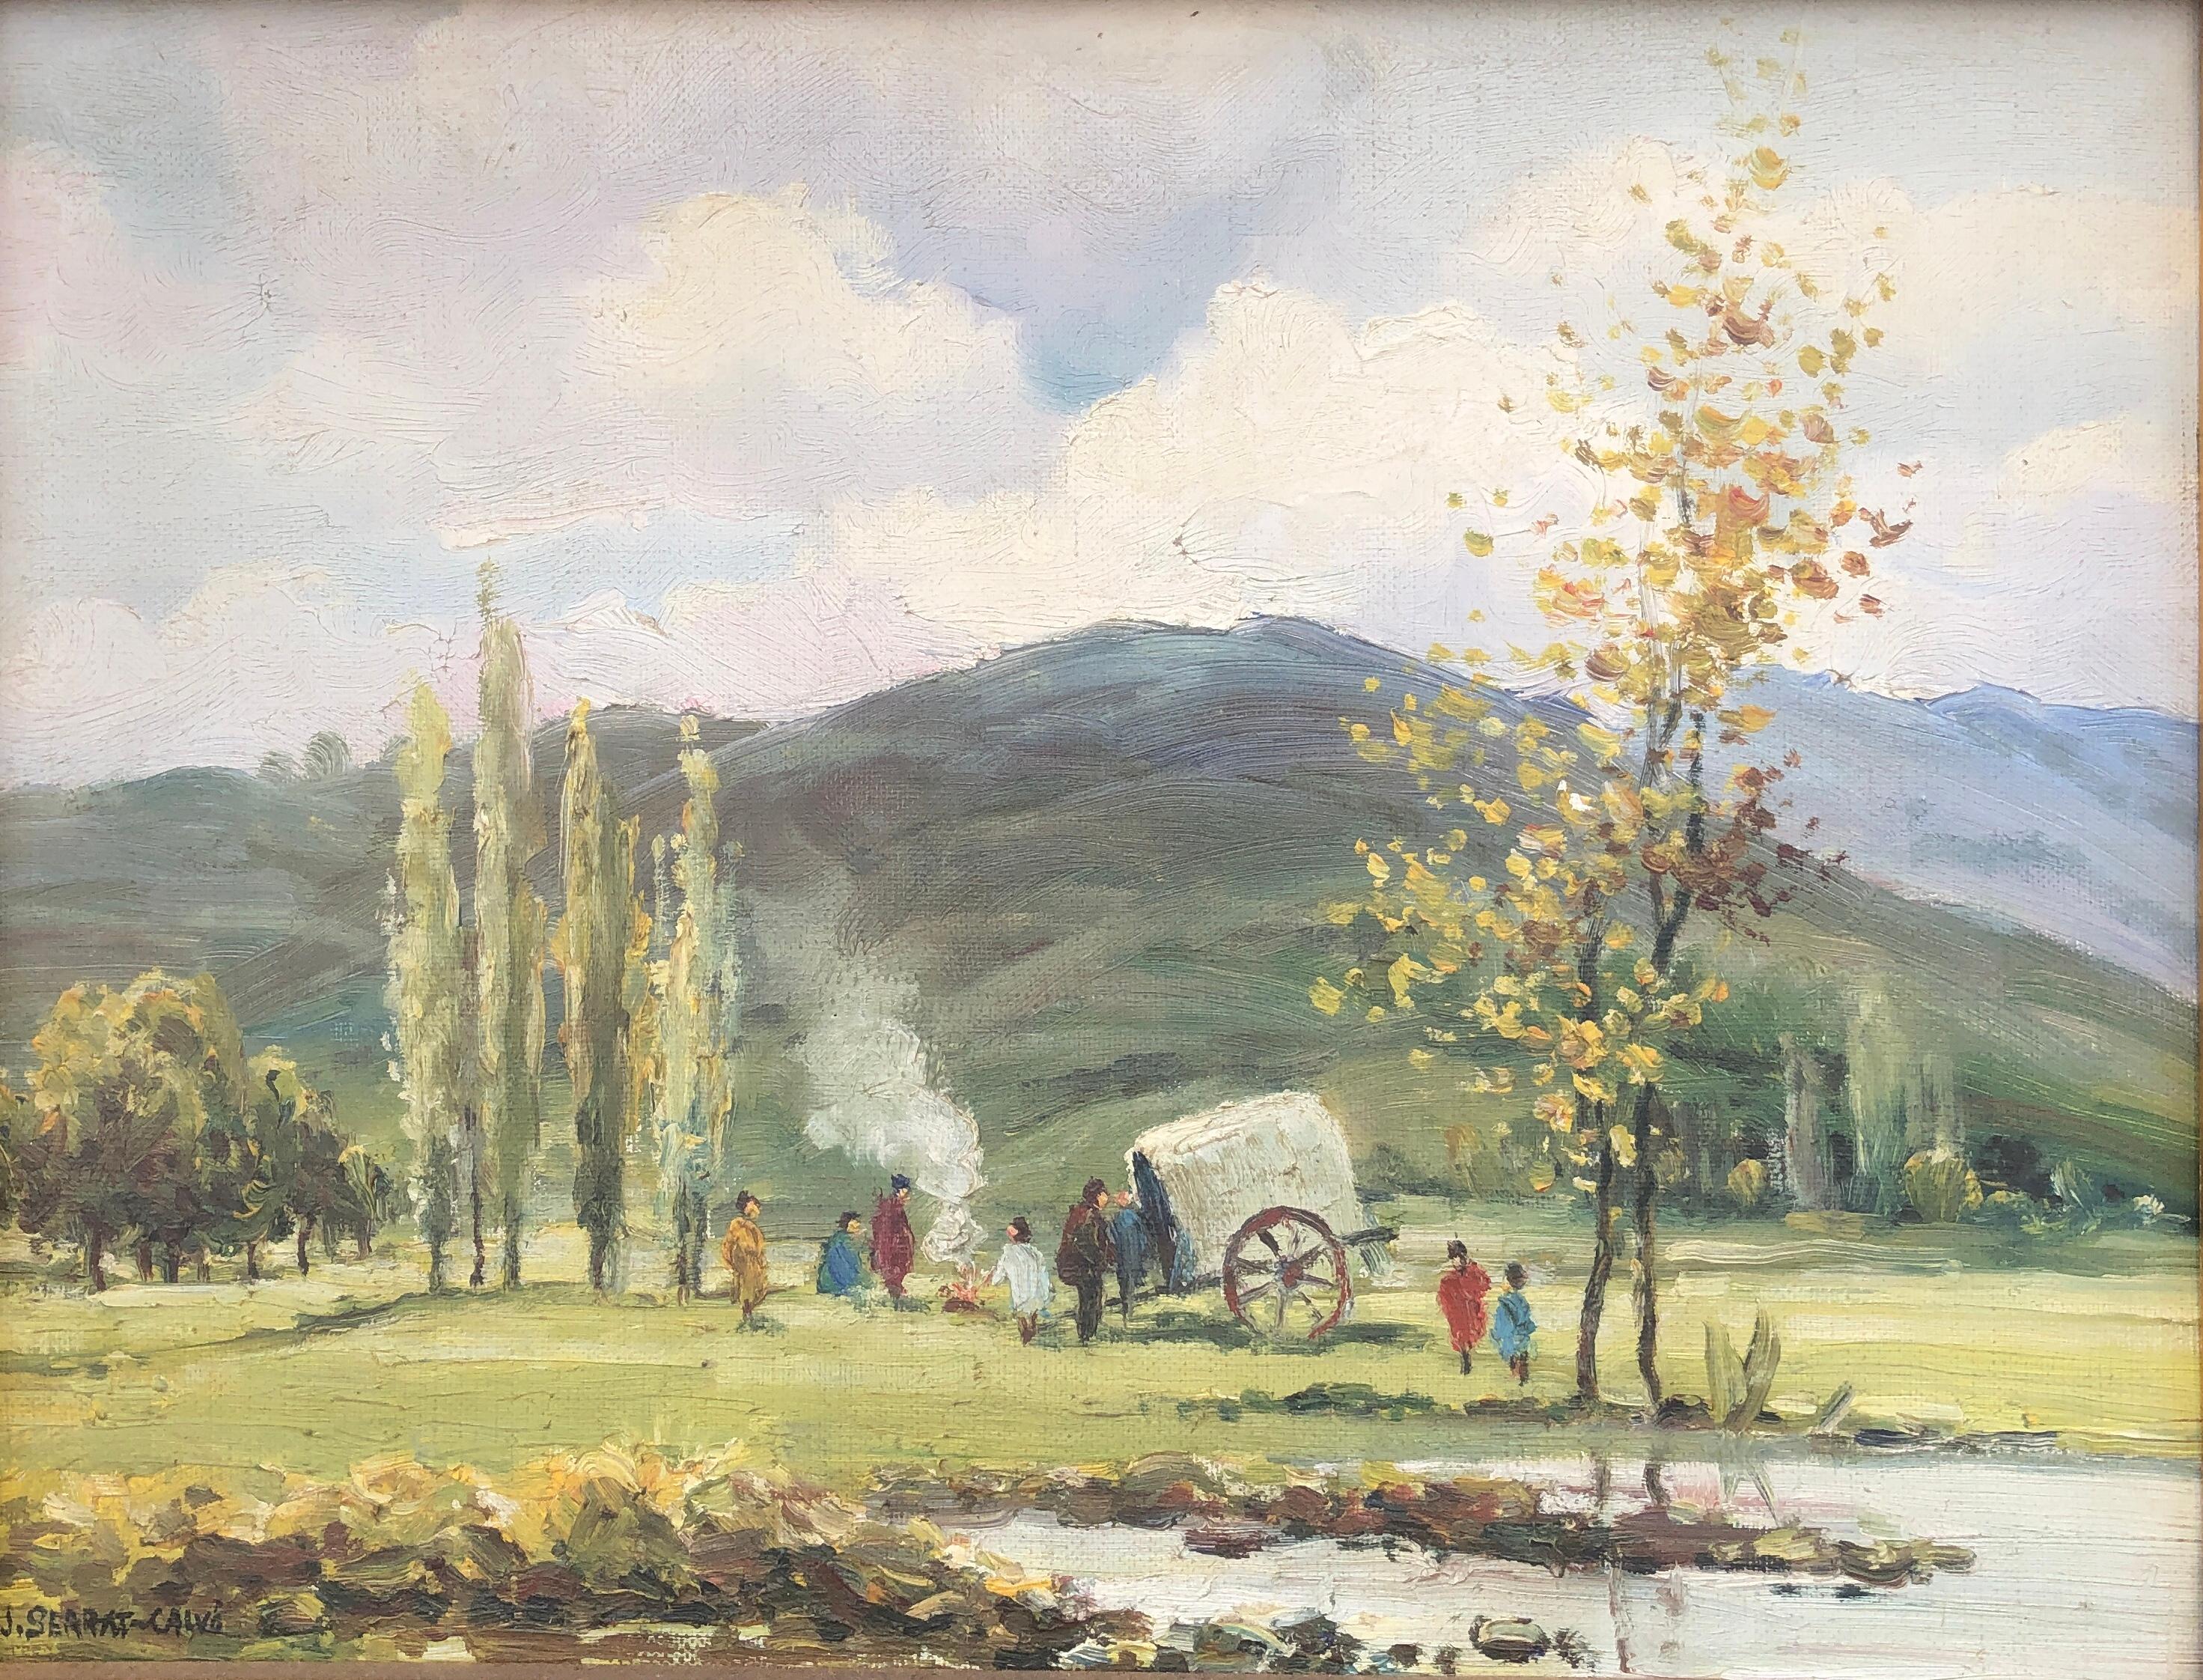 Gypsies in the river oil on canvas painting spanish landscape 